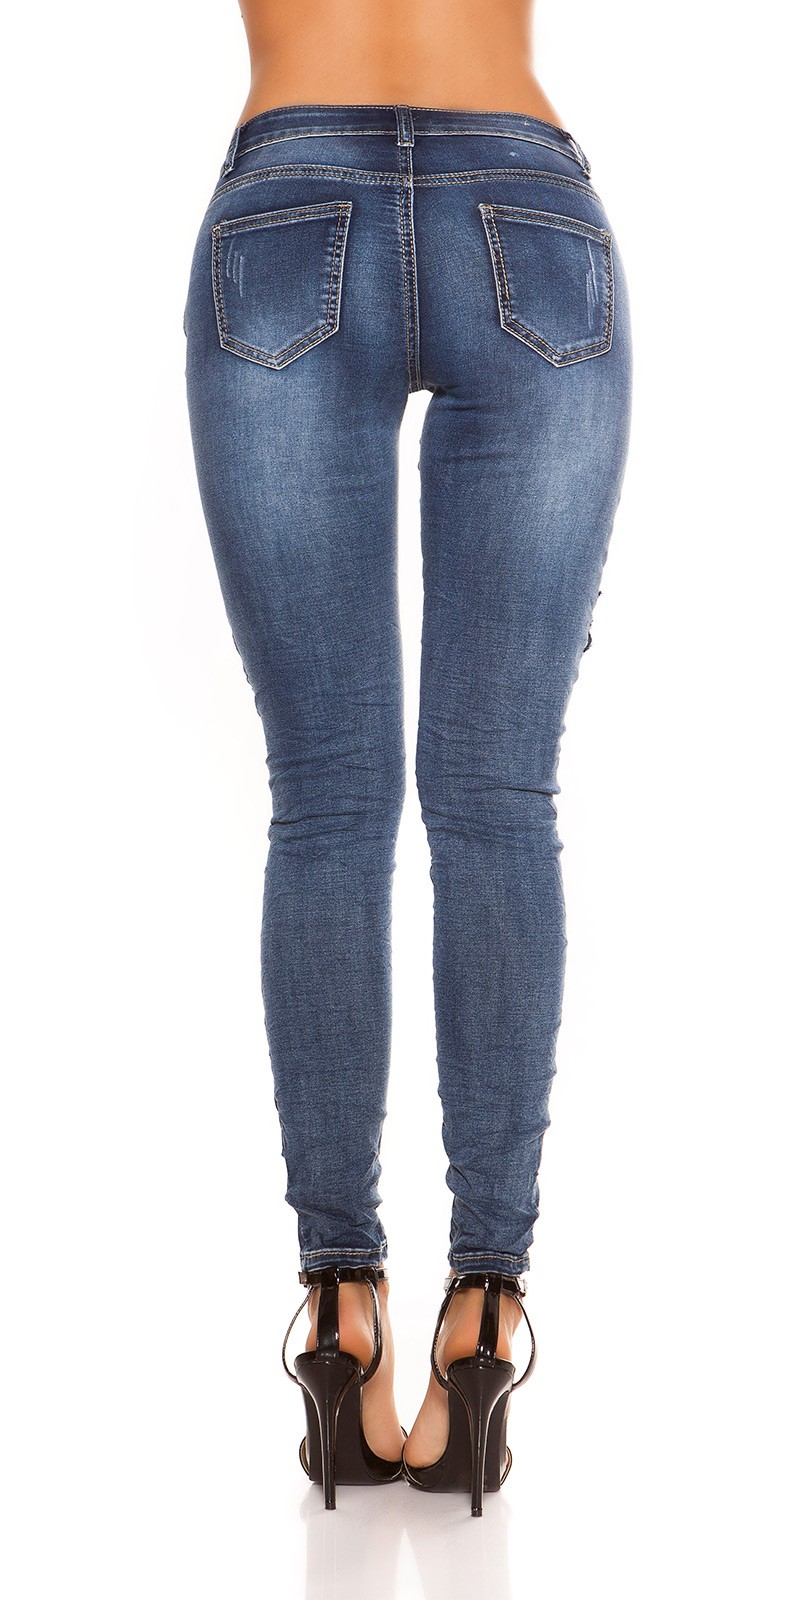 Jeans c/ rede 2